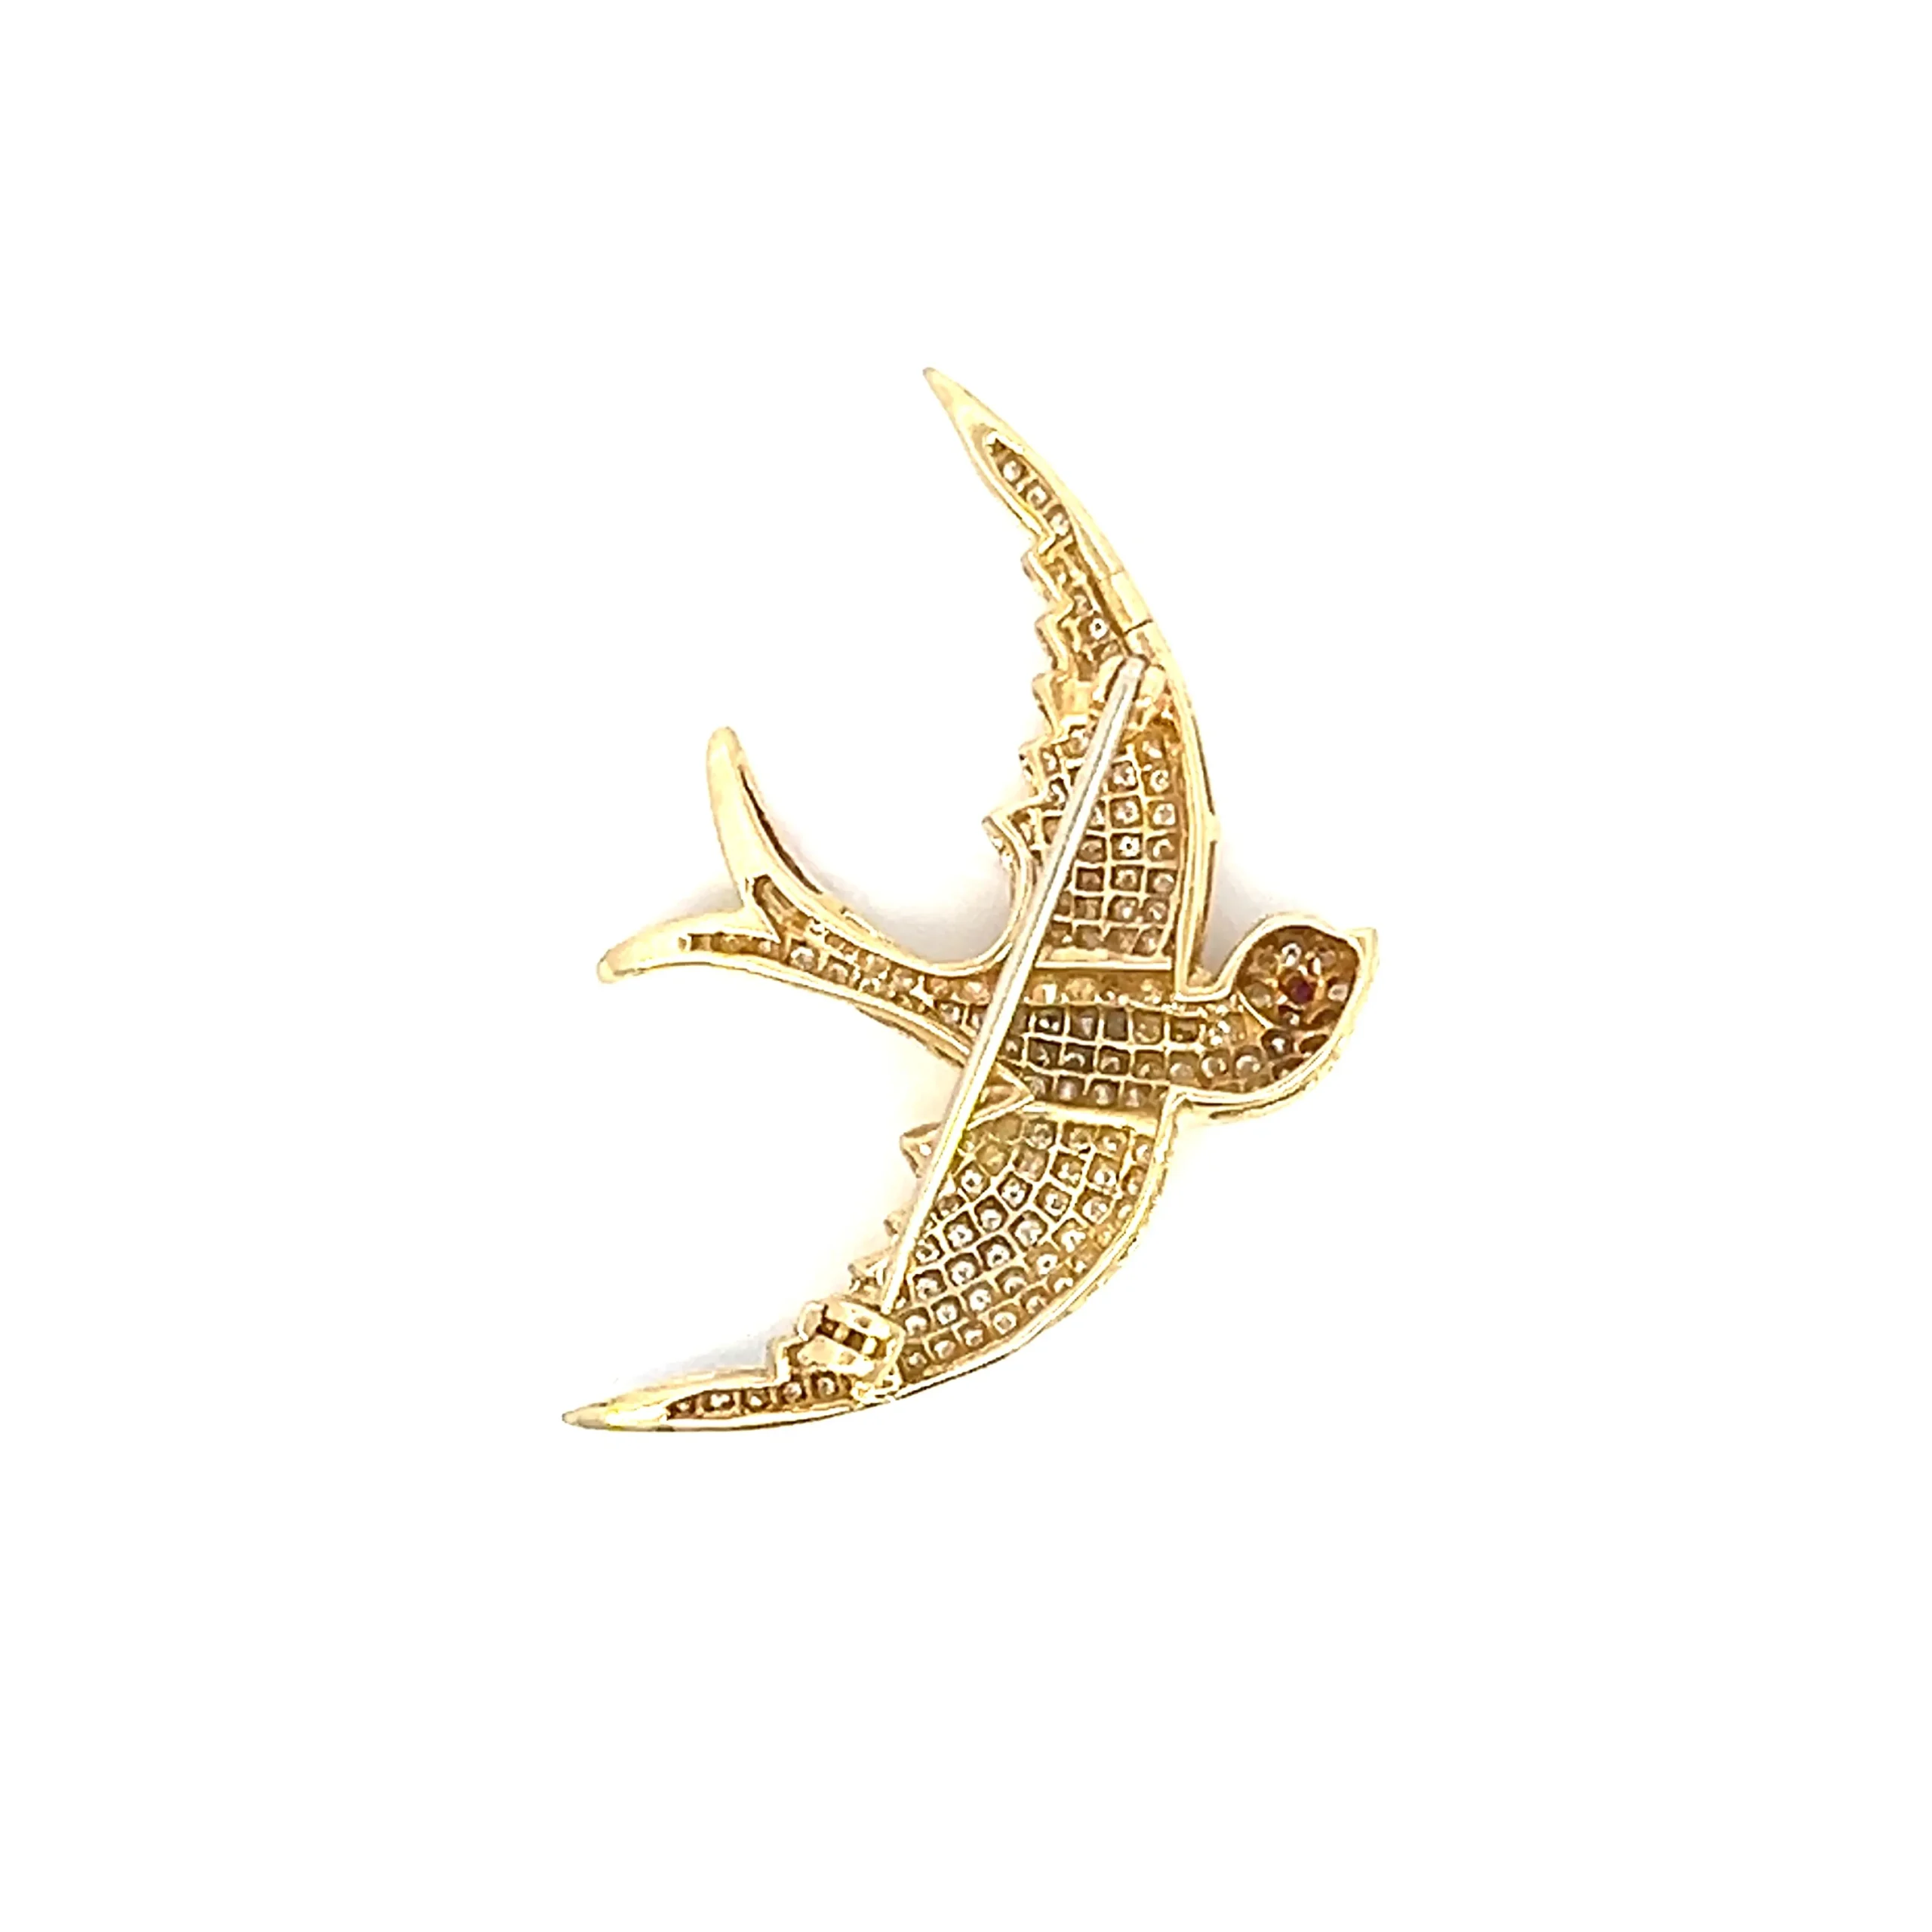 estate 18 karat yellow gold flying bird brooch set with 173 round brilliant diamonds approximately 1.50 total carat weight and 1 round 1mm ruby set at the bird's eye.